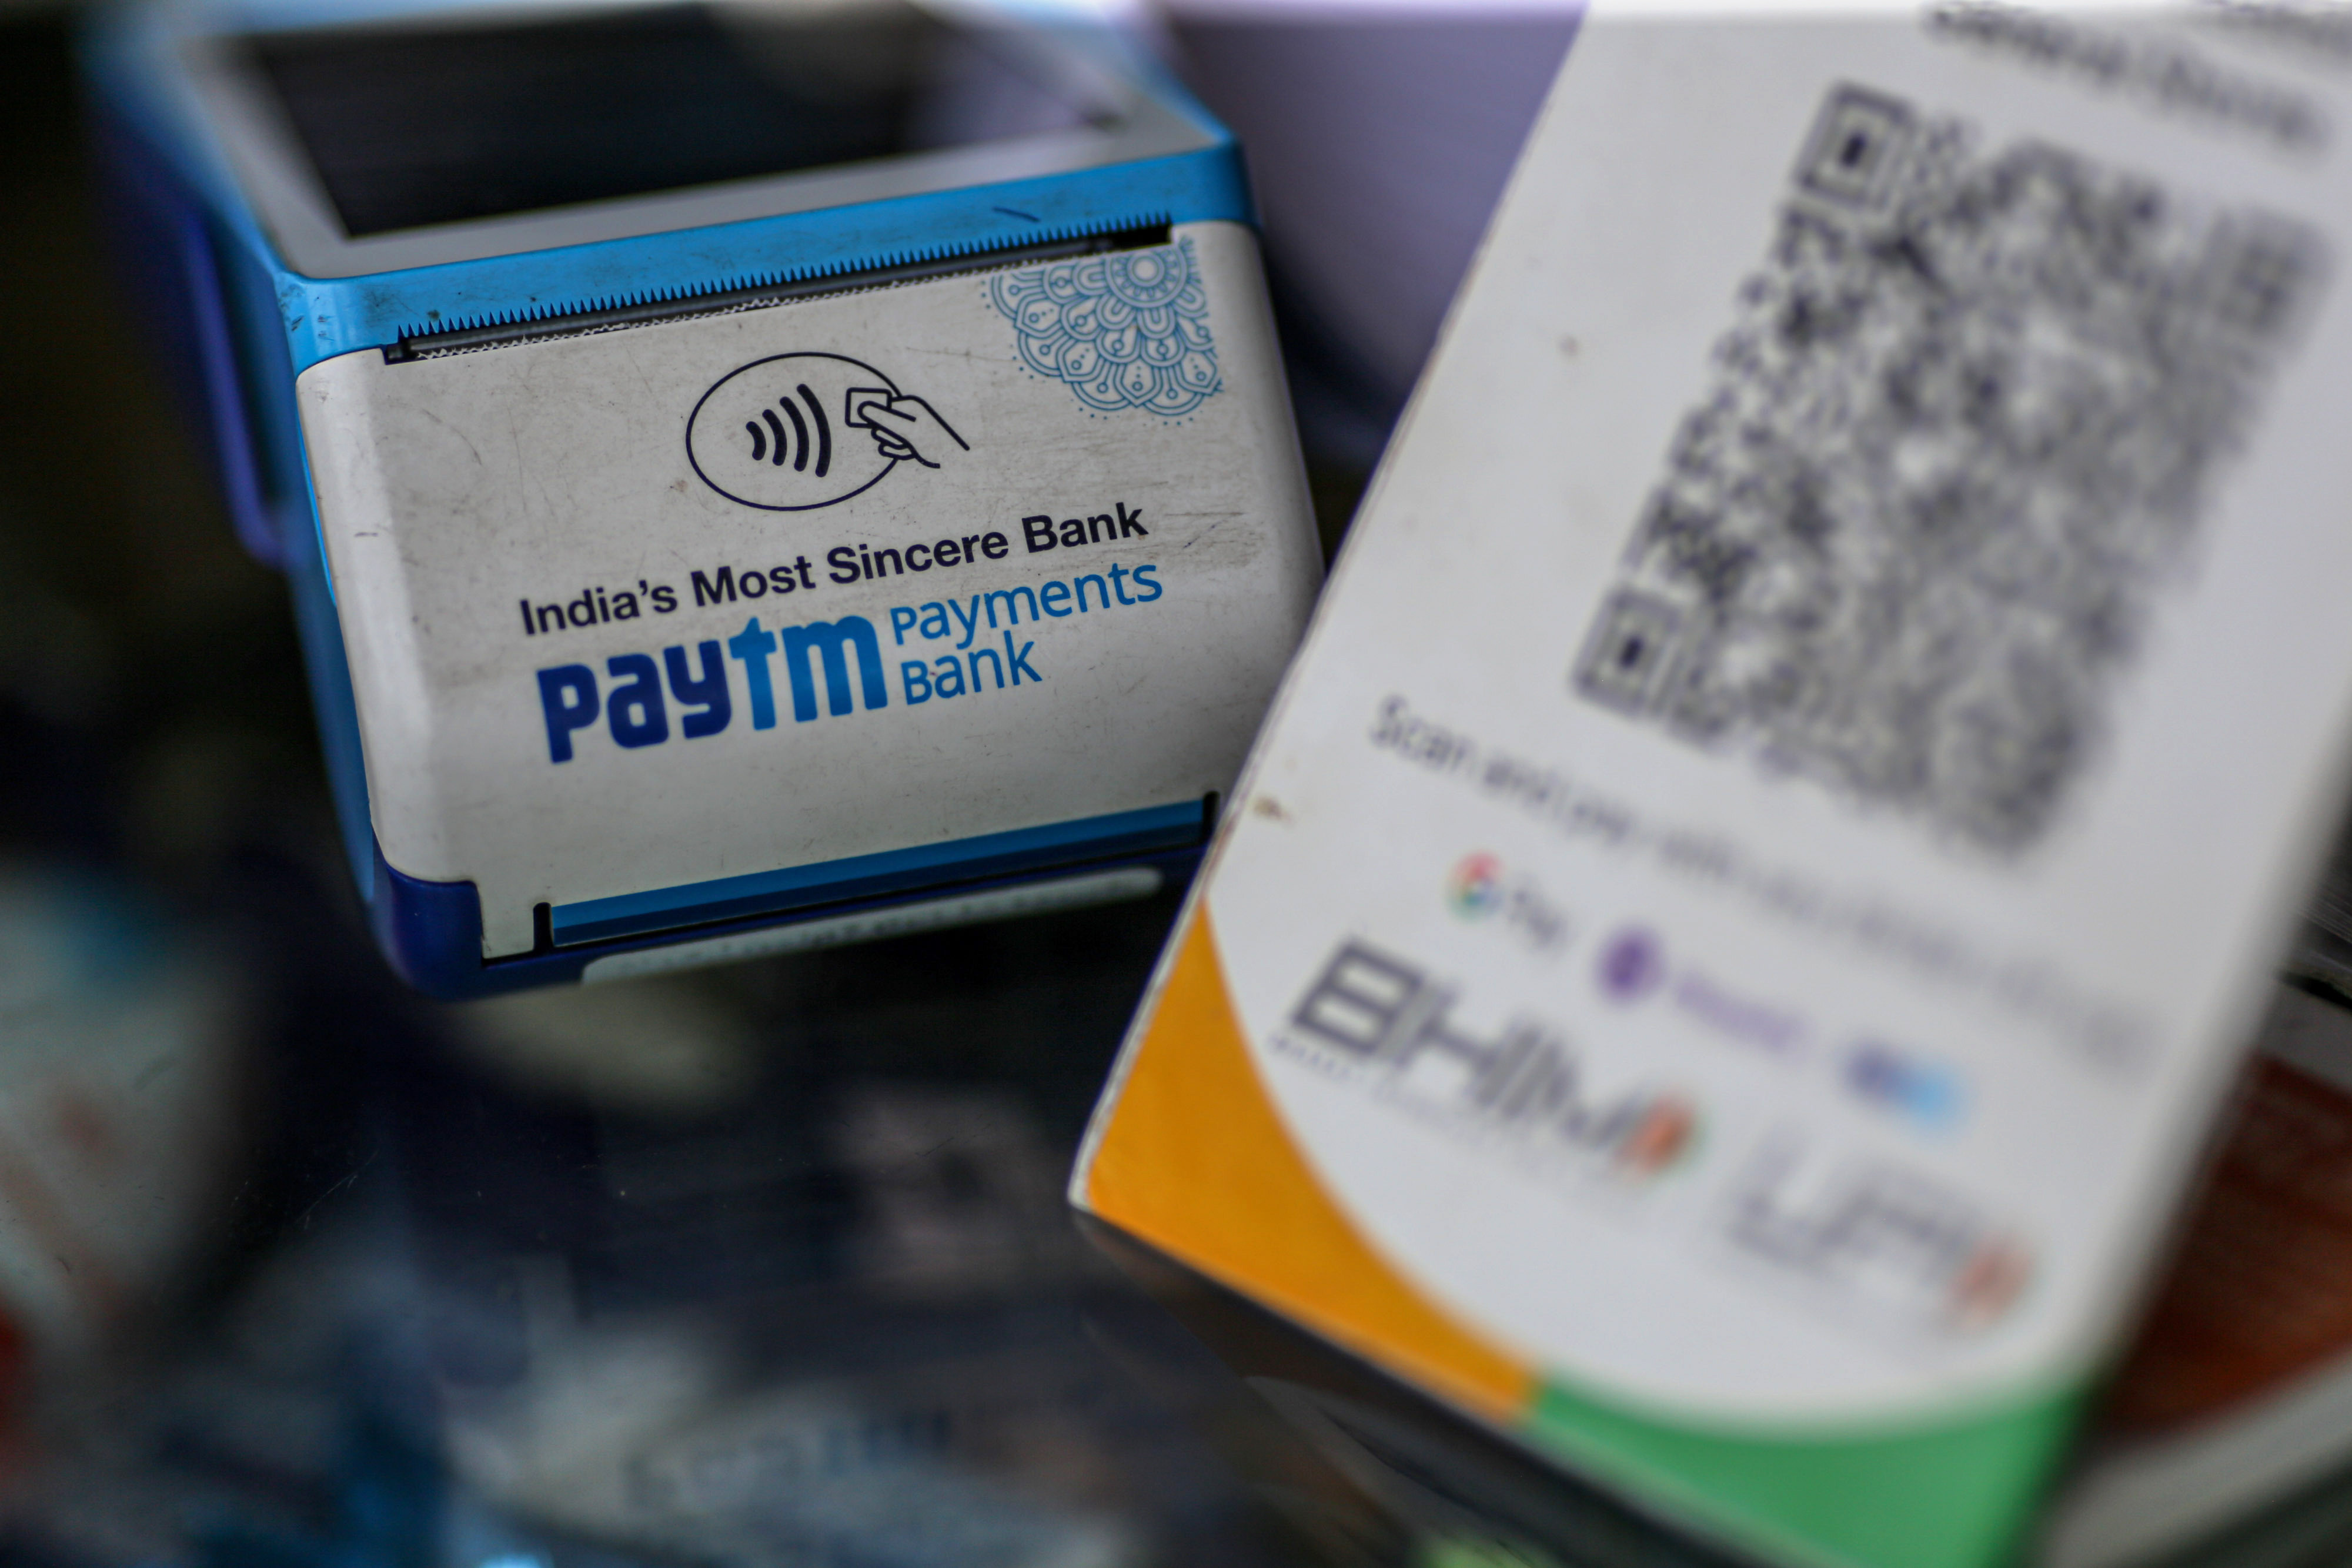 A Paytm payment device at a store in Mumbai, India. Photo: Bloomberg